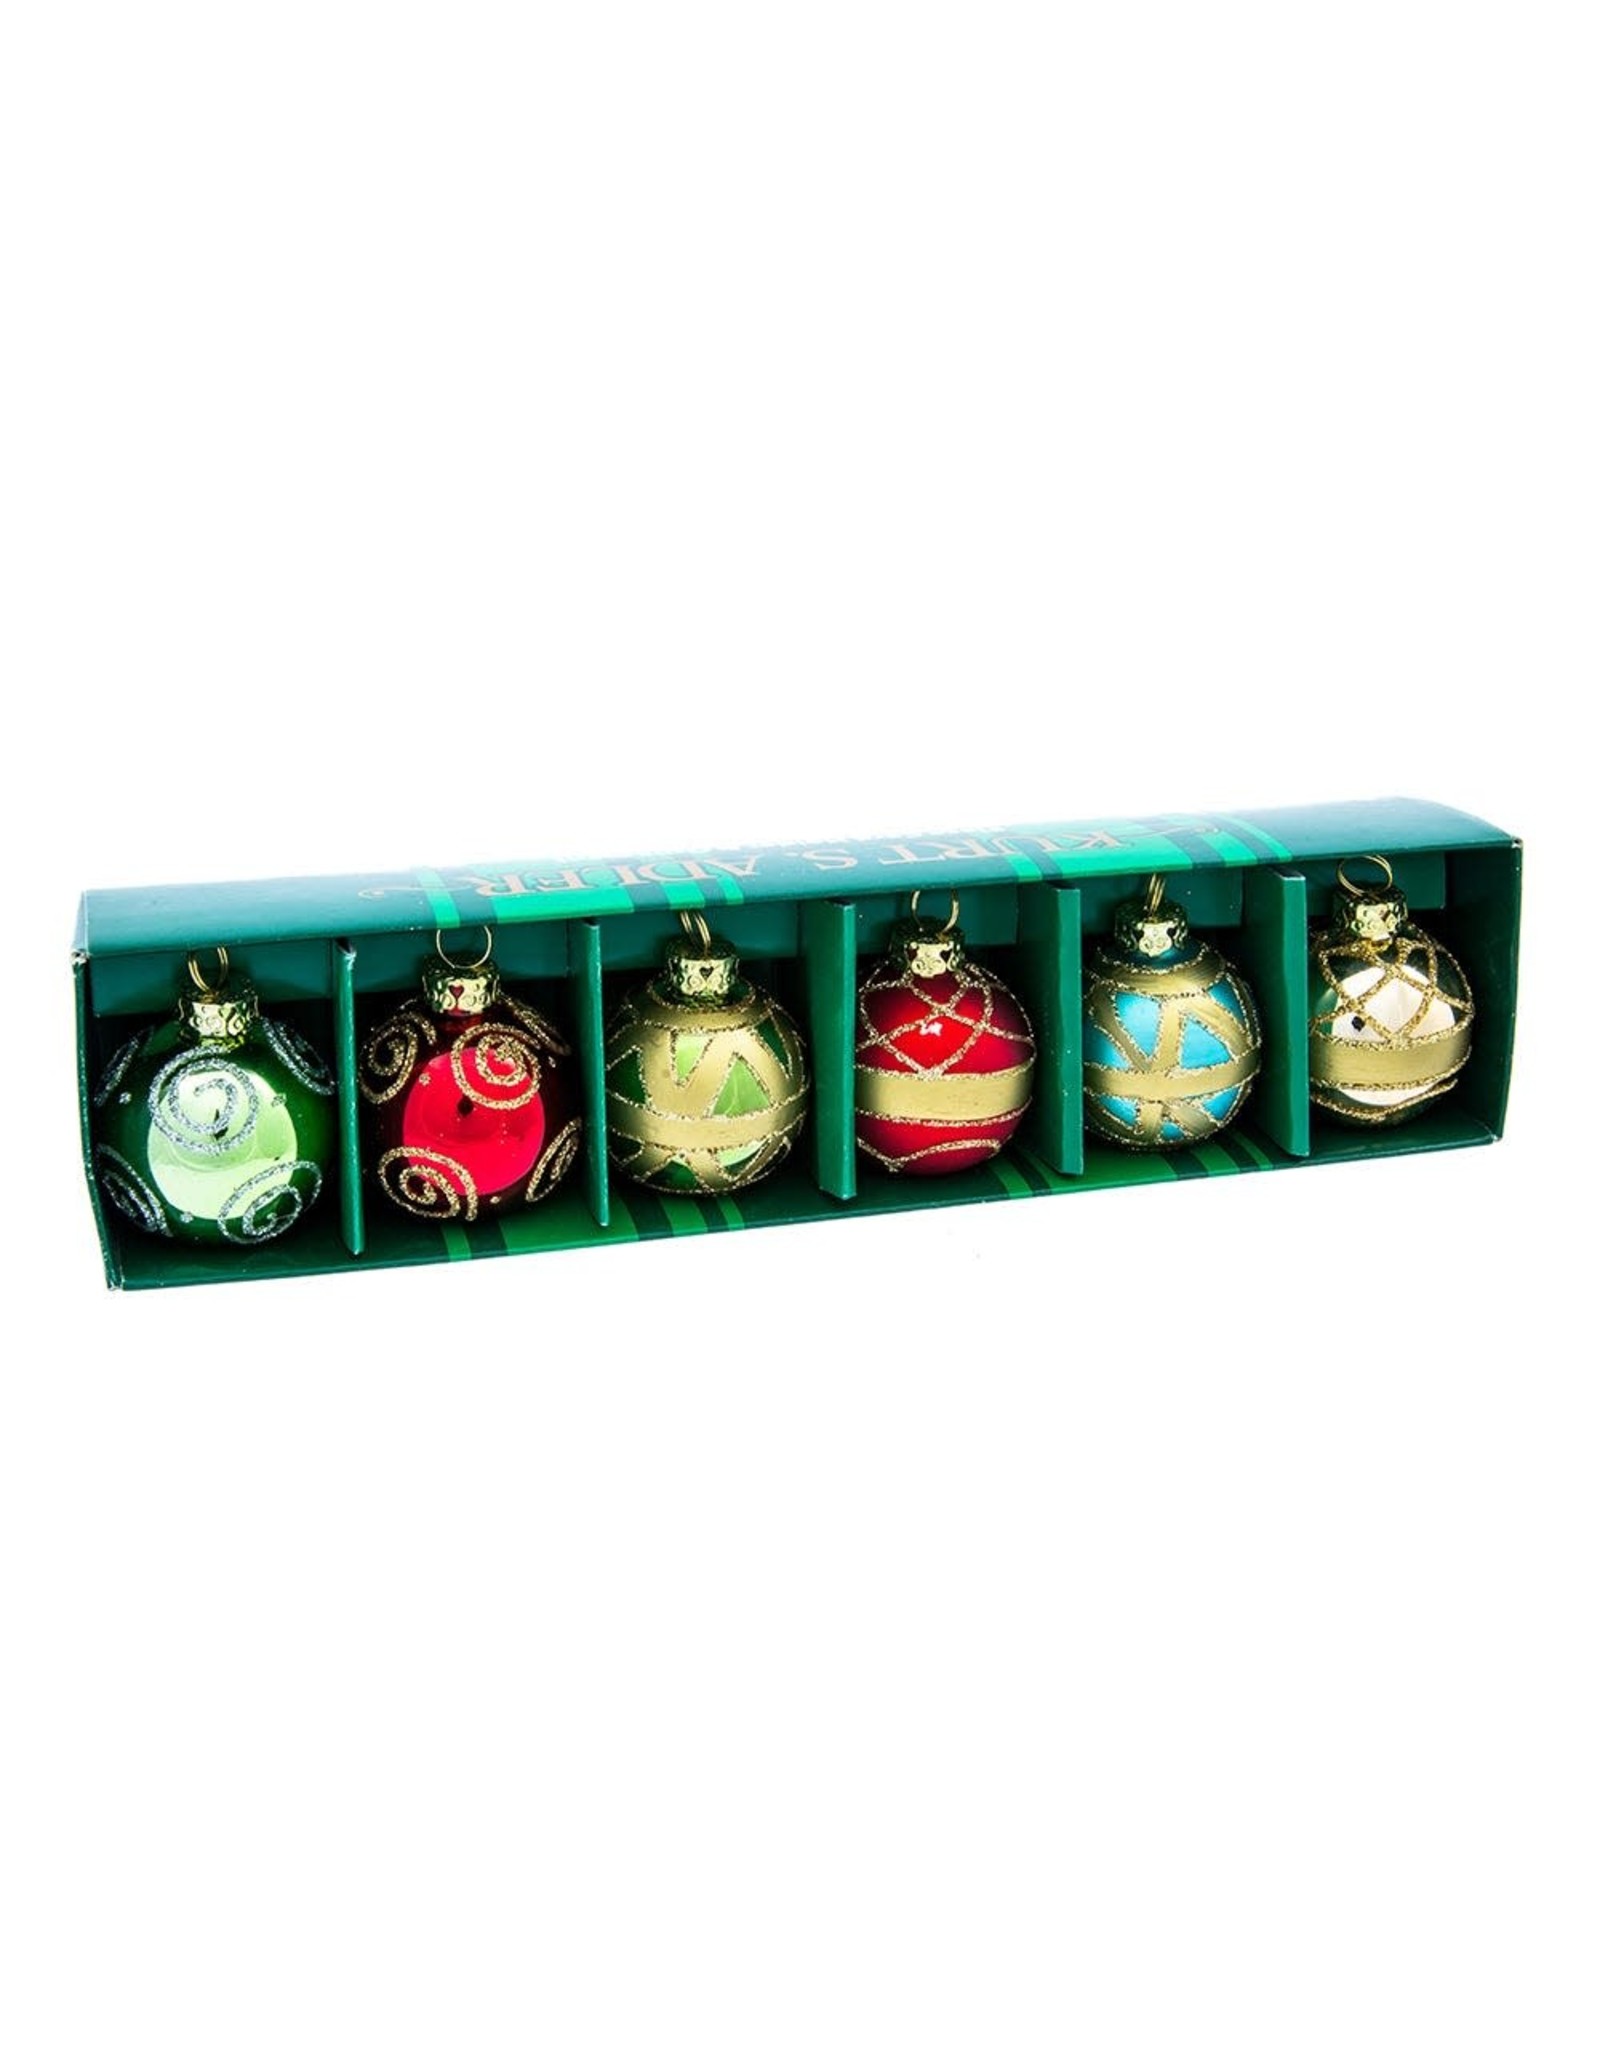 Kurt Adler Christmas Place Card Holders Ball Ornaments W Place Cards 6pc